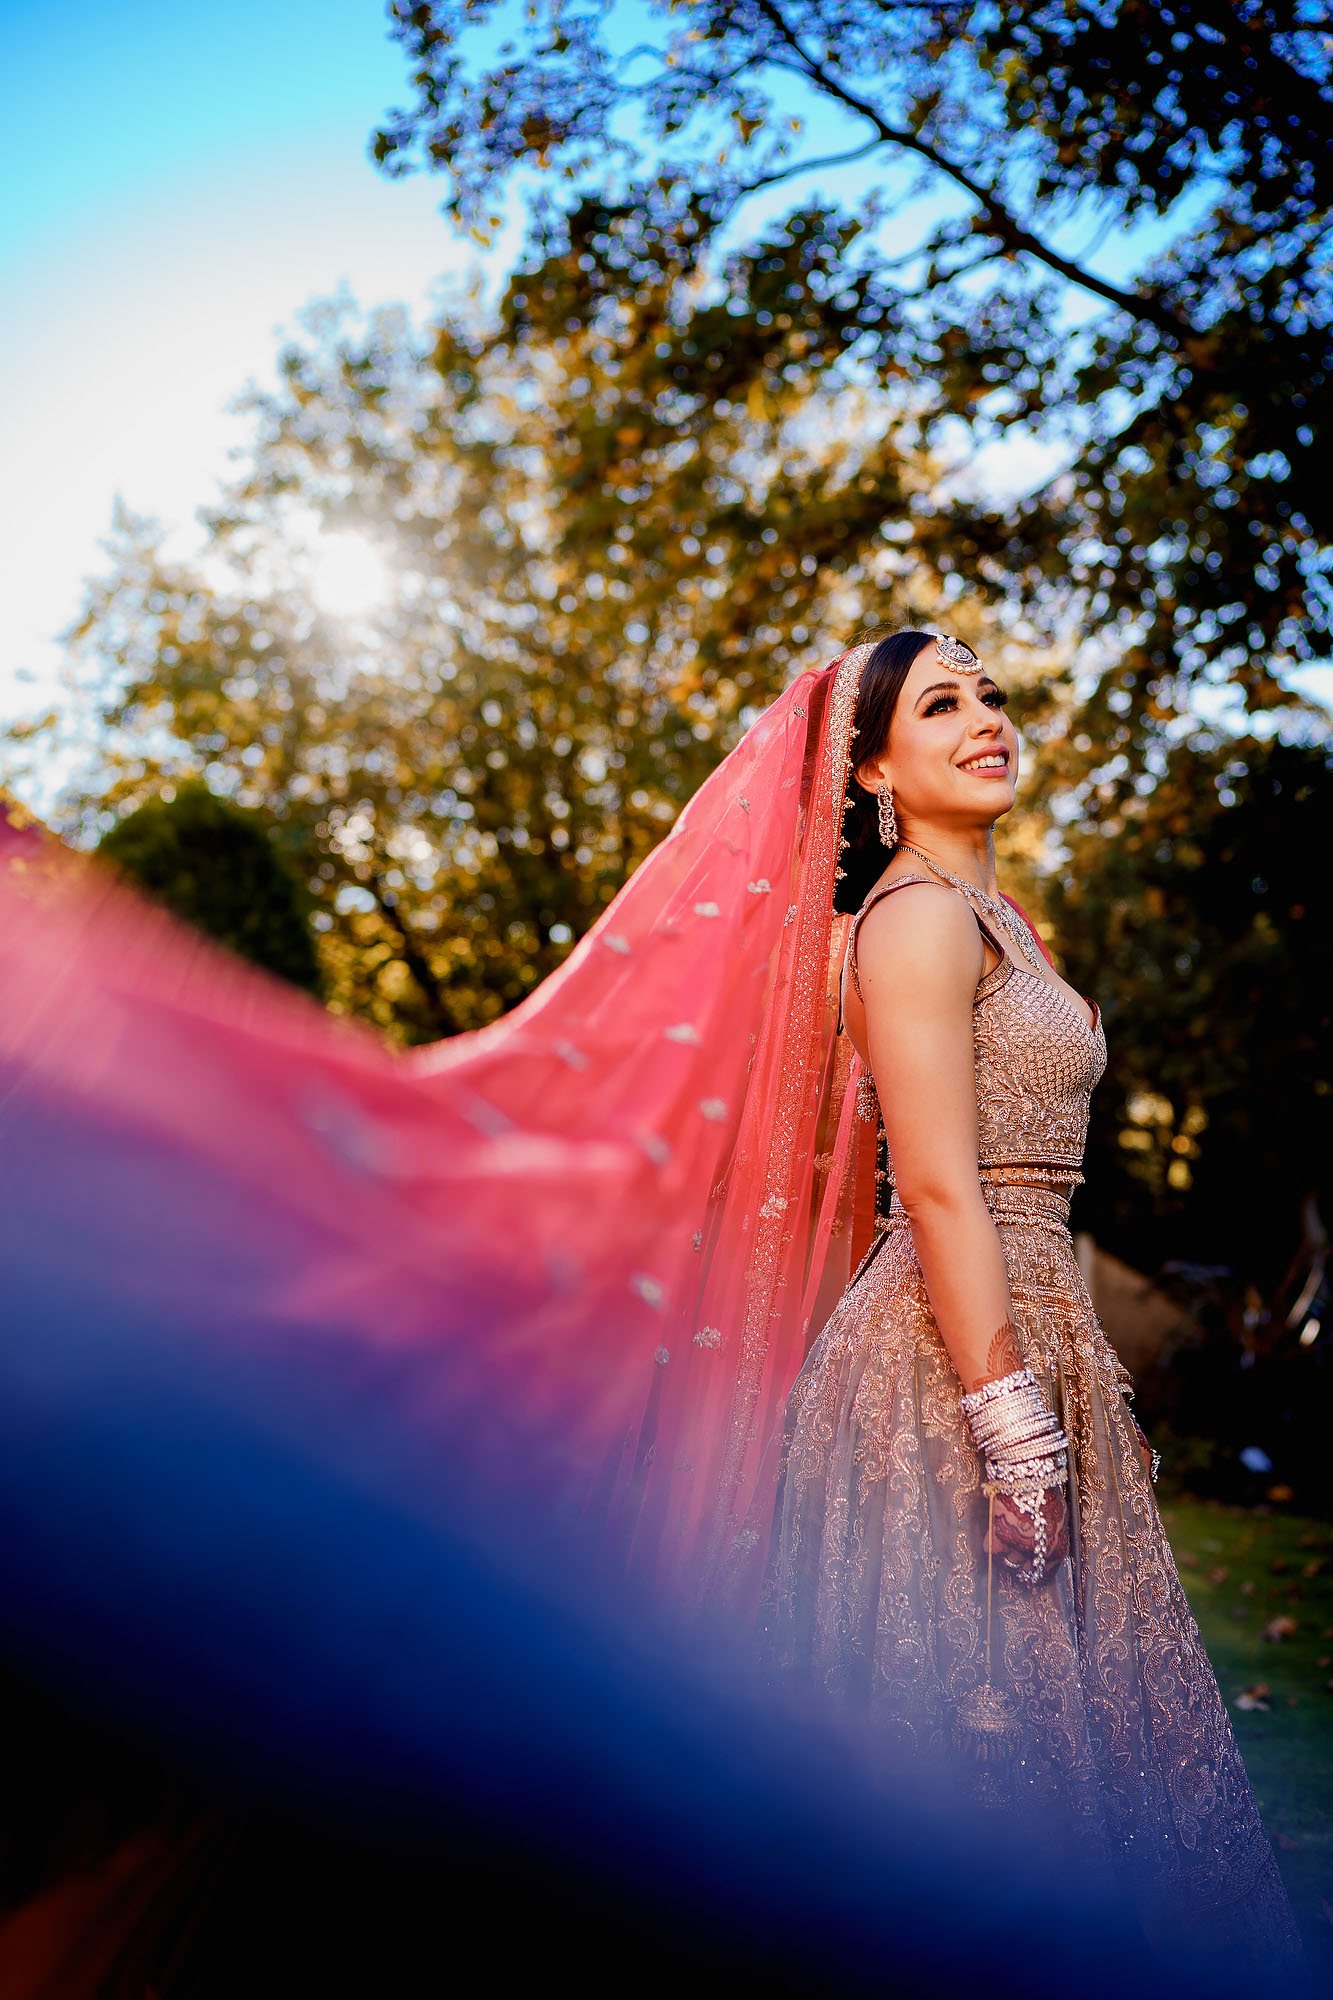 The best wedding photography of 2020 - cheshire wedding photographers arj photography